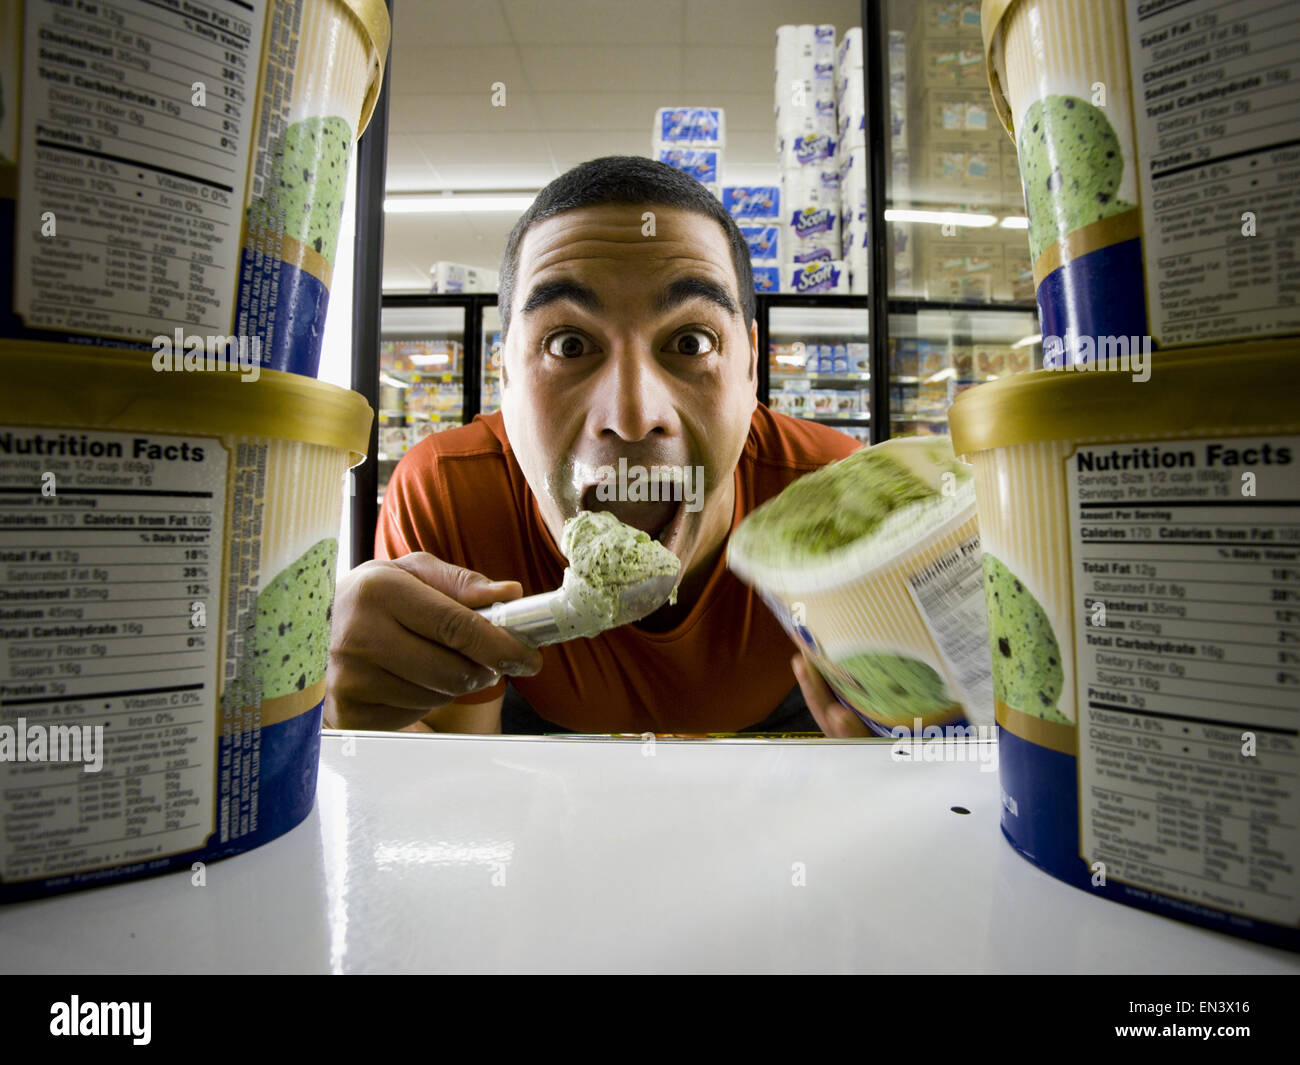 Man eating ice cream at grocery store Banque D'Images